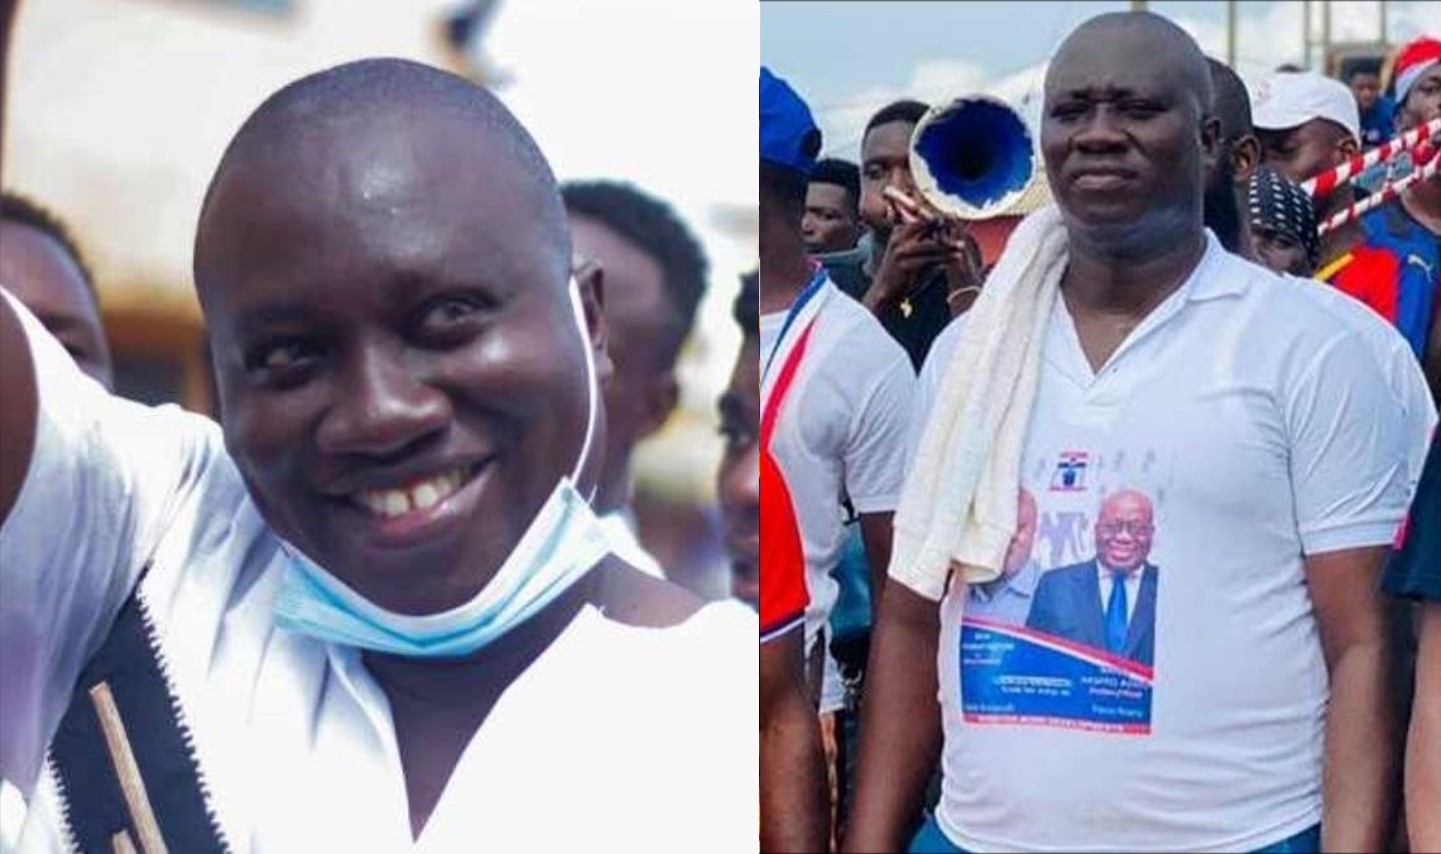 About Gh¢20,000 has been placed on the killers of Mfantseman MP